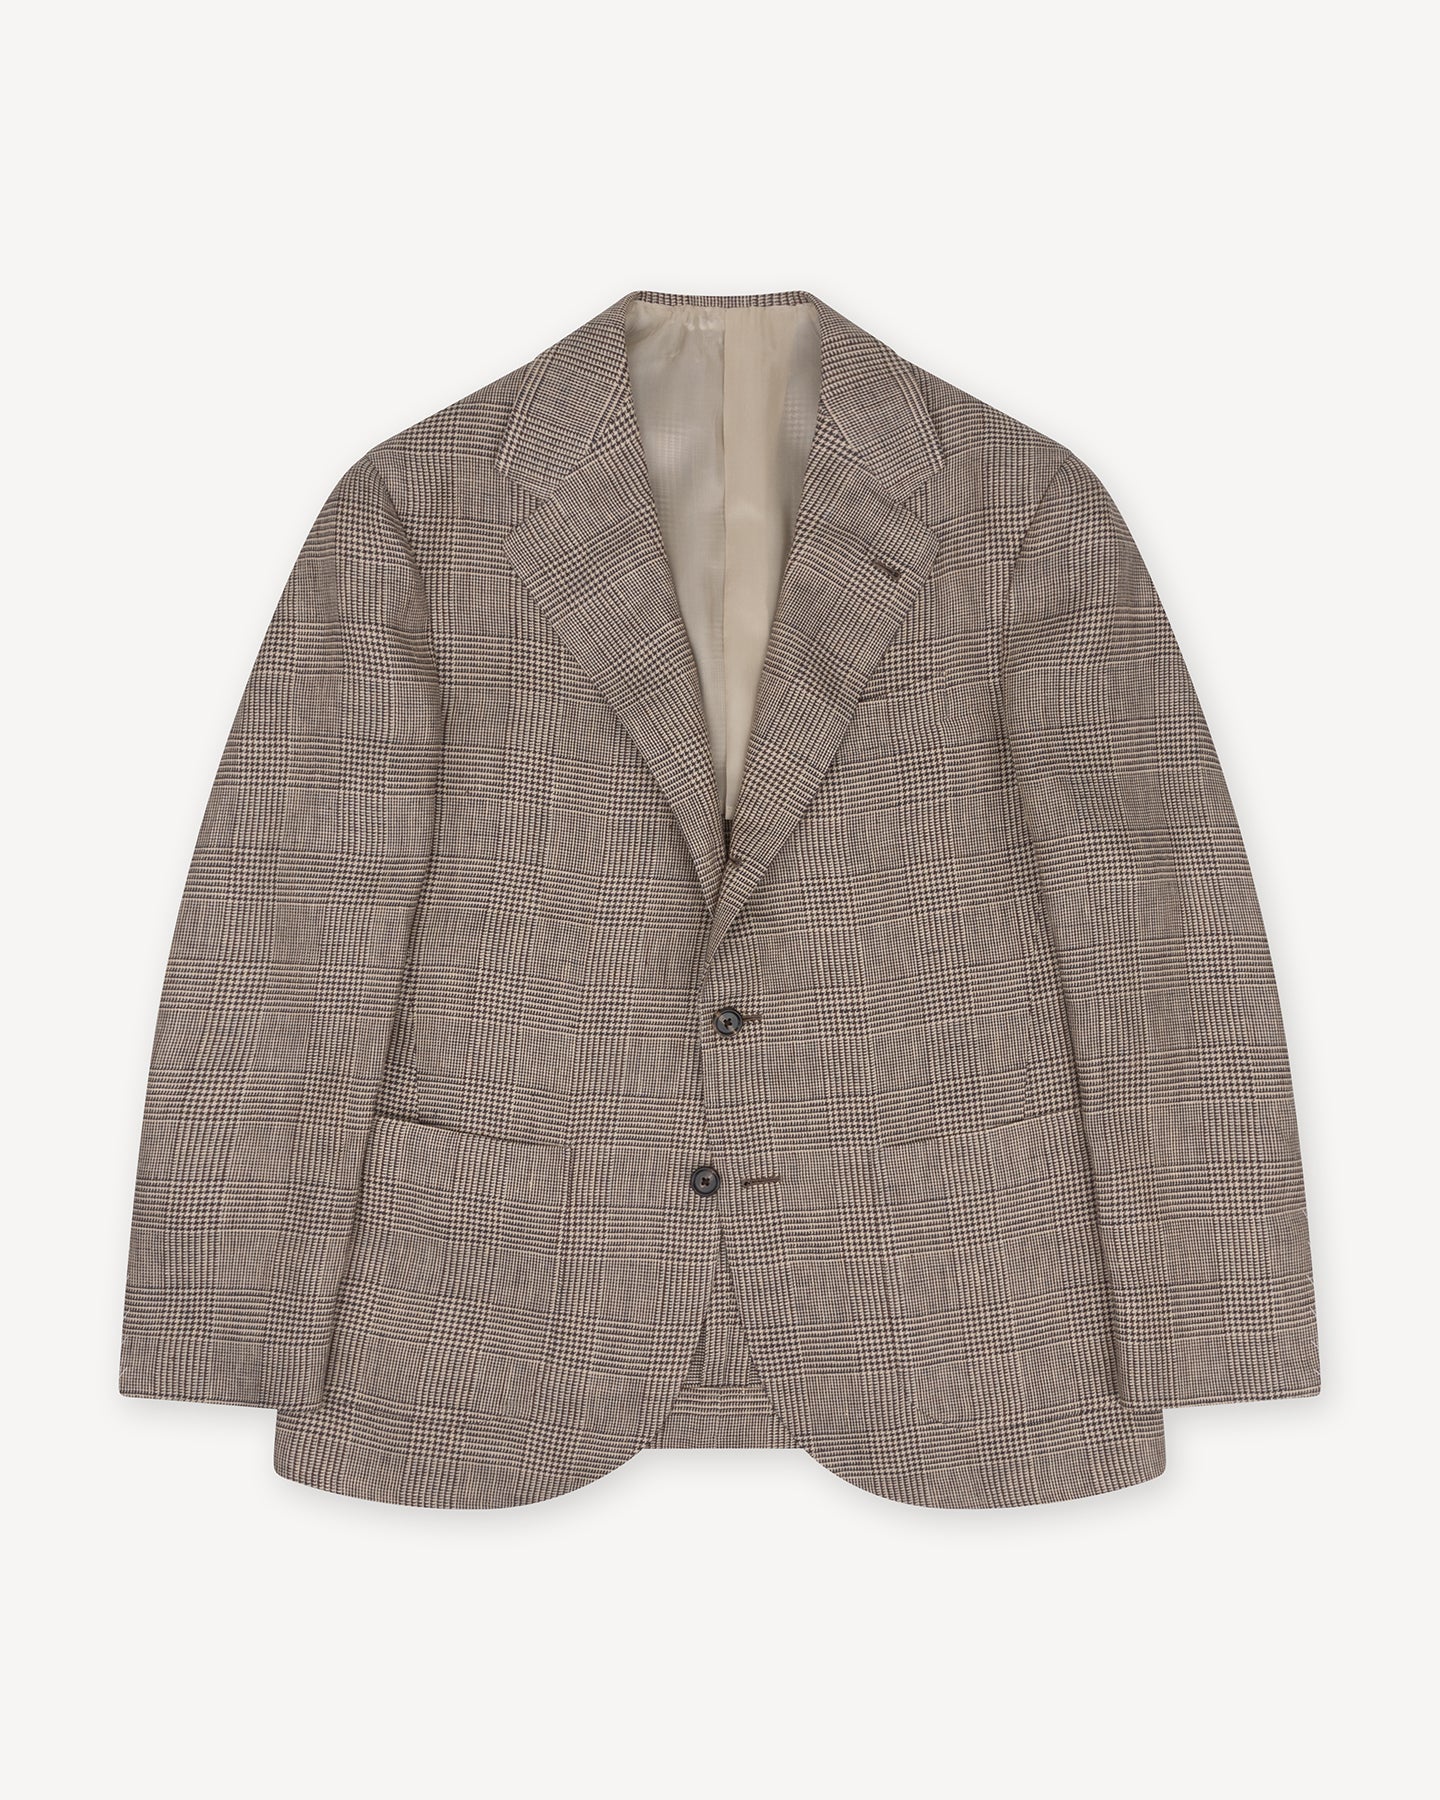 Top view of sport coat in a beige linen prince of wales fabric with dark blue and warm brown shades